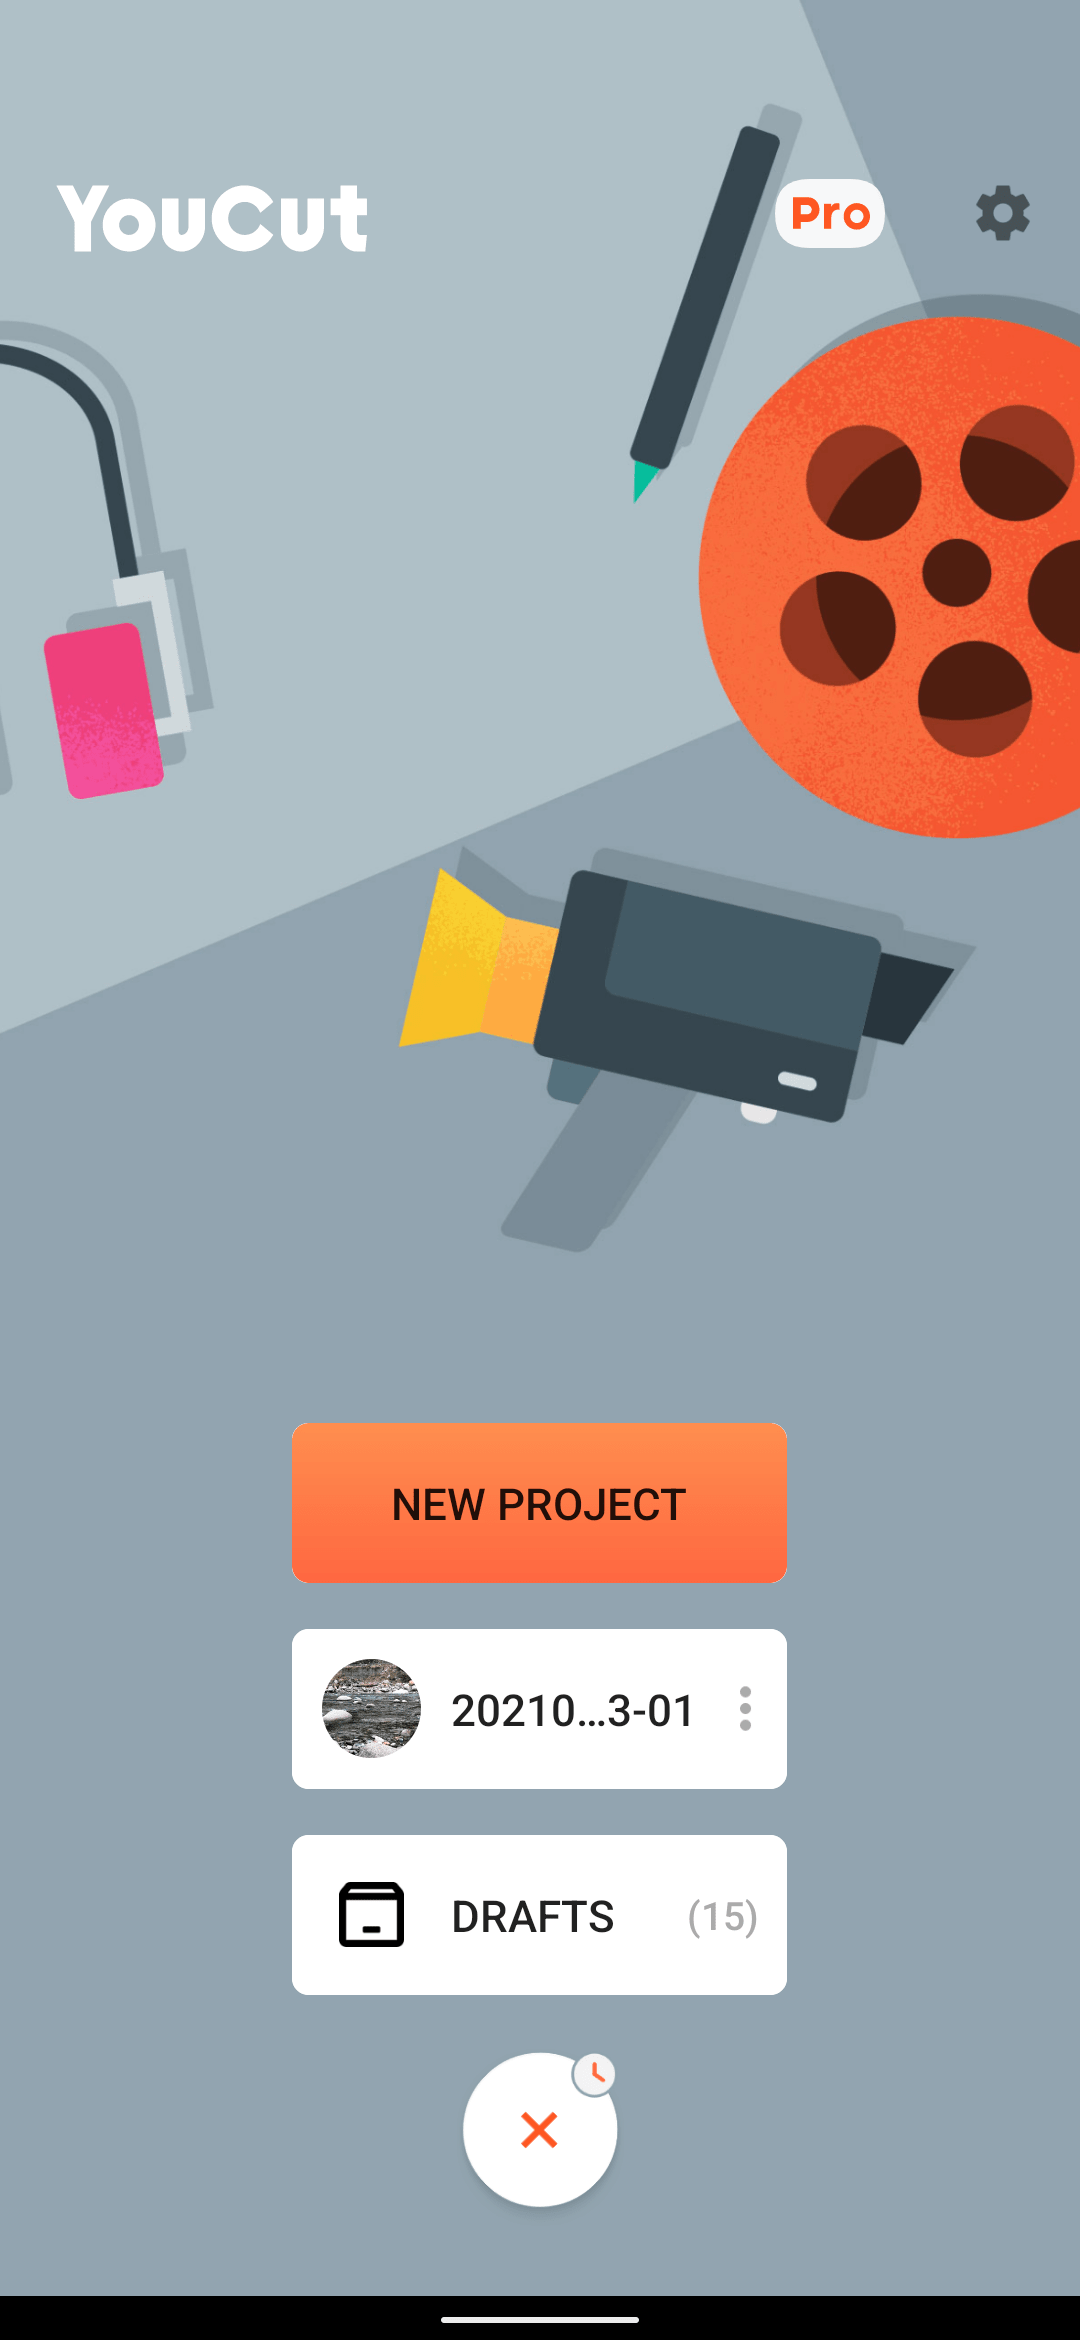 Create a new project in YouCut